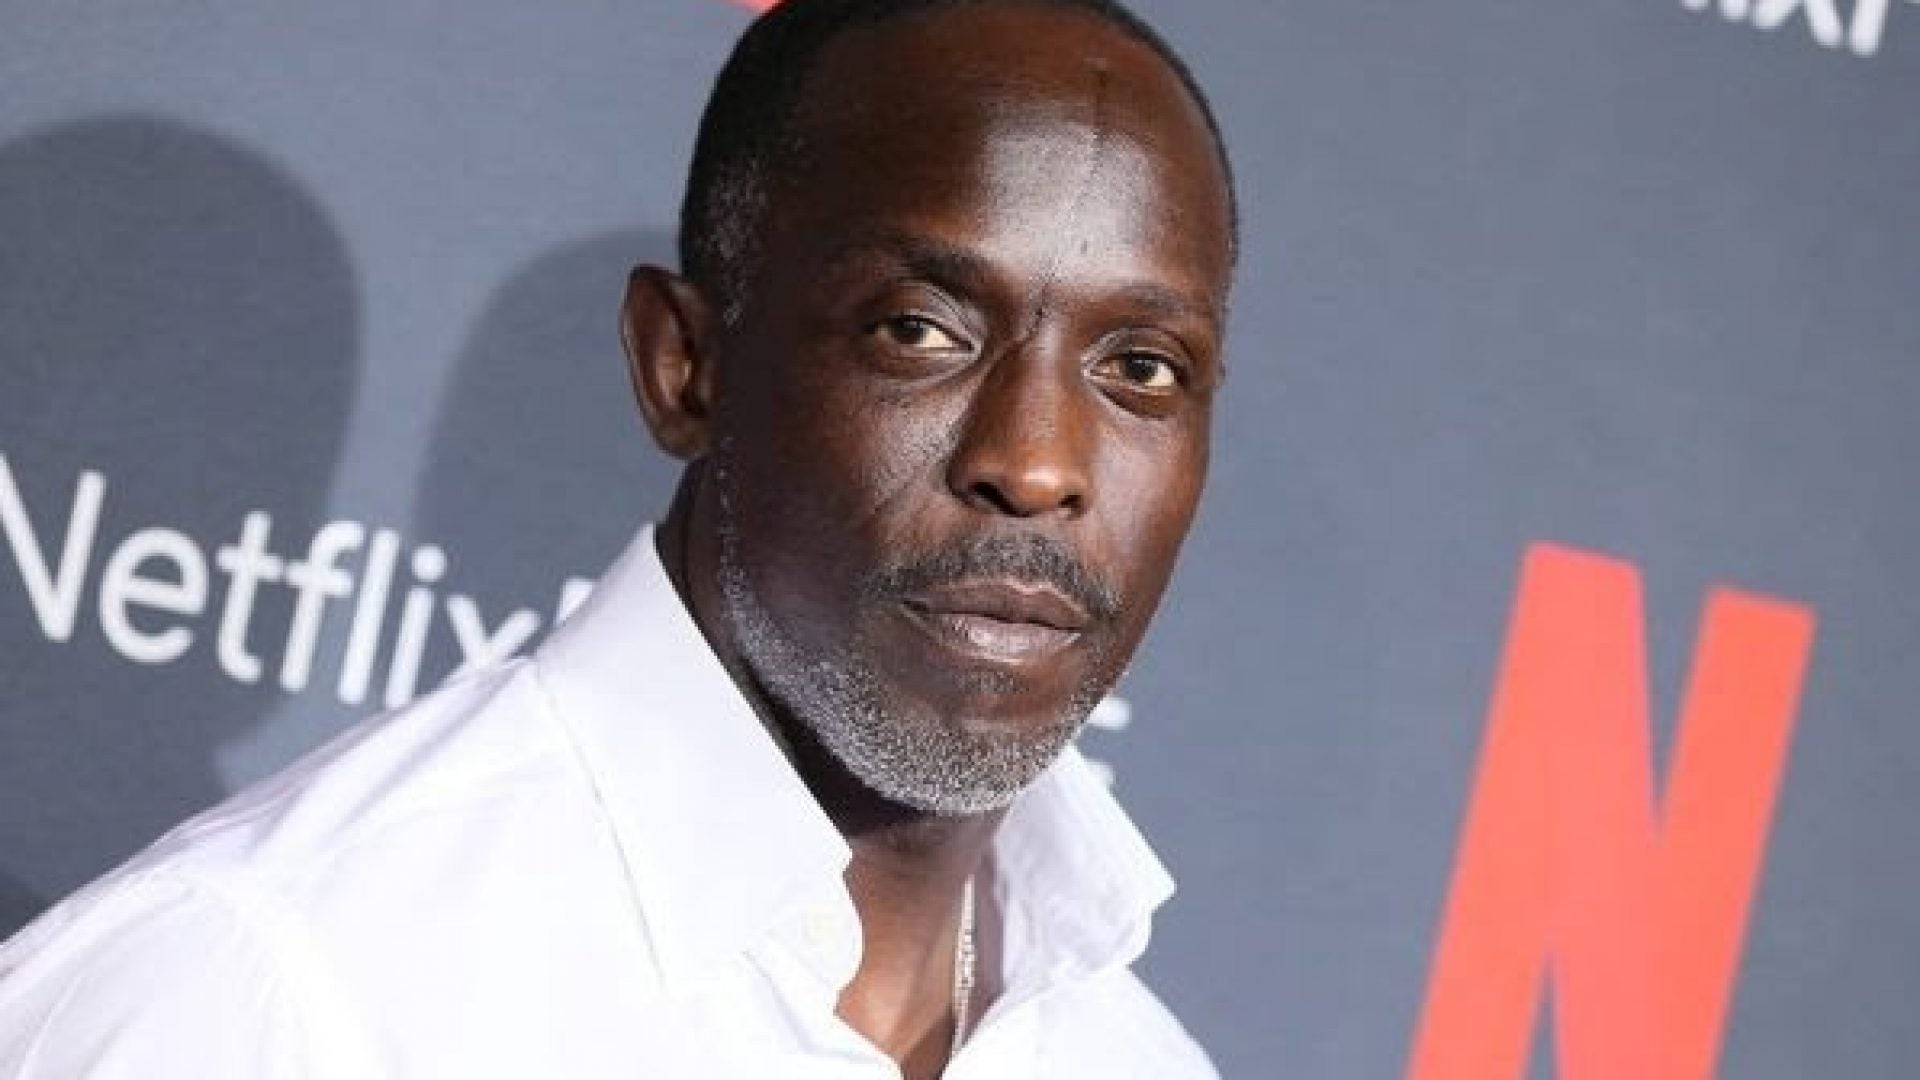 Michael K. Williams Dancing To House Music Is The Black Joy You Need This Friday